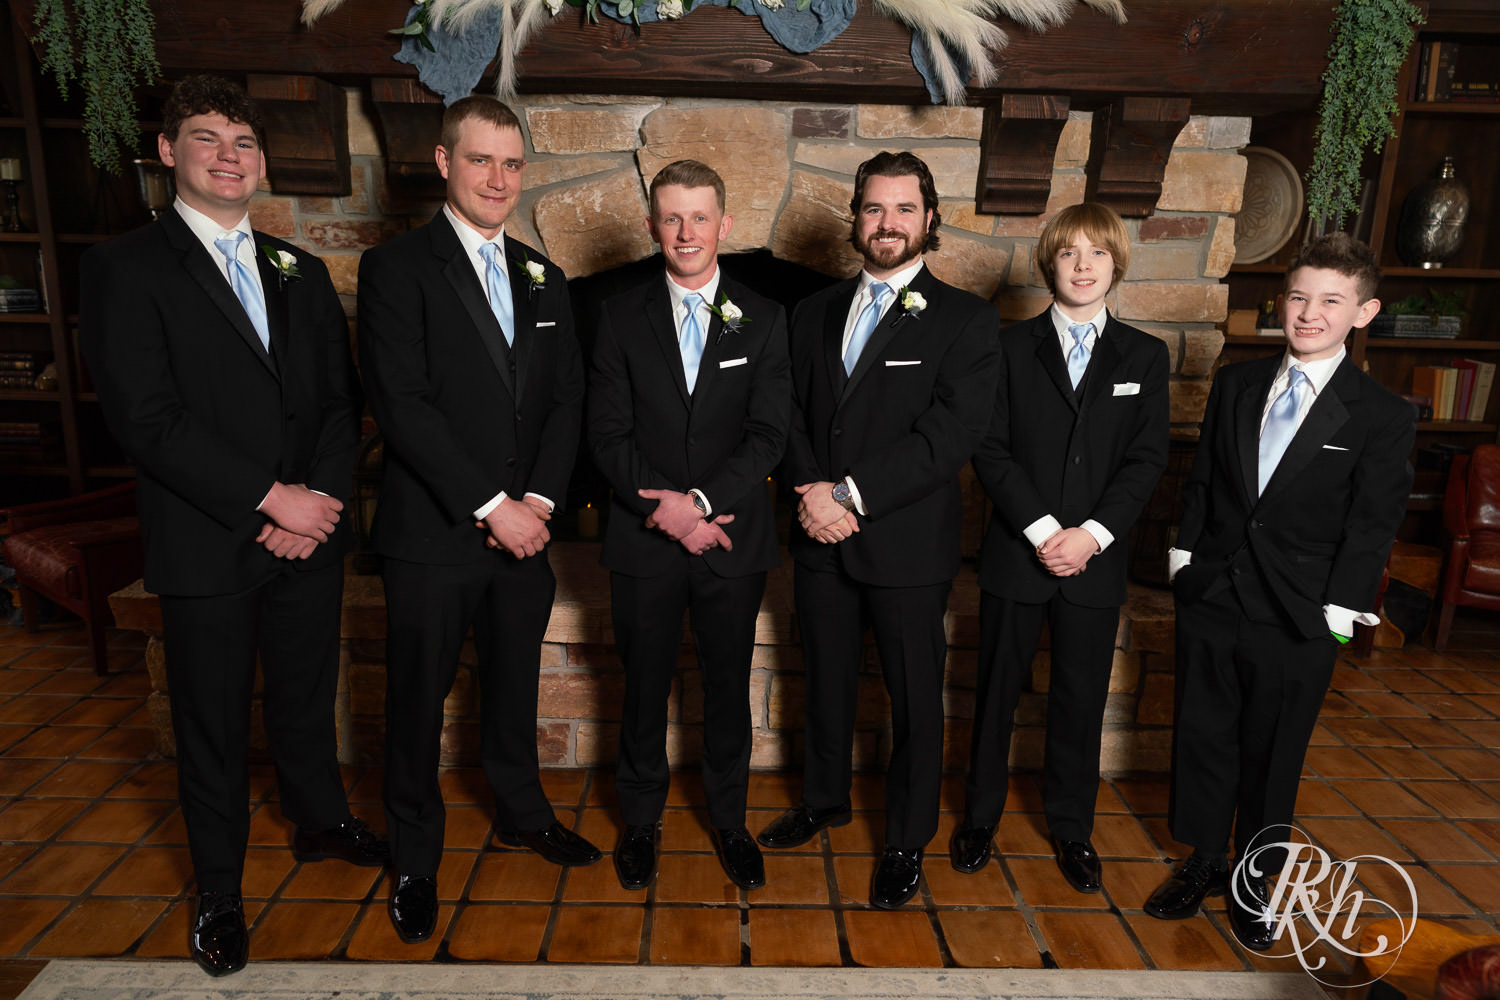 Wedding party smiles with the groom during wedding photography at Bavaria Downs in Chaska, Minnesota.